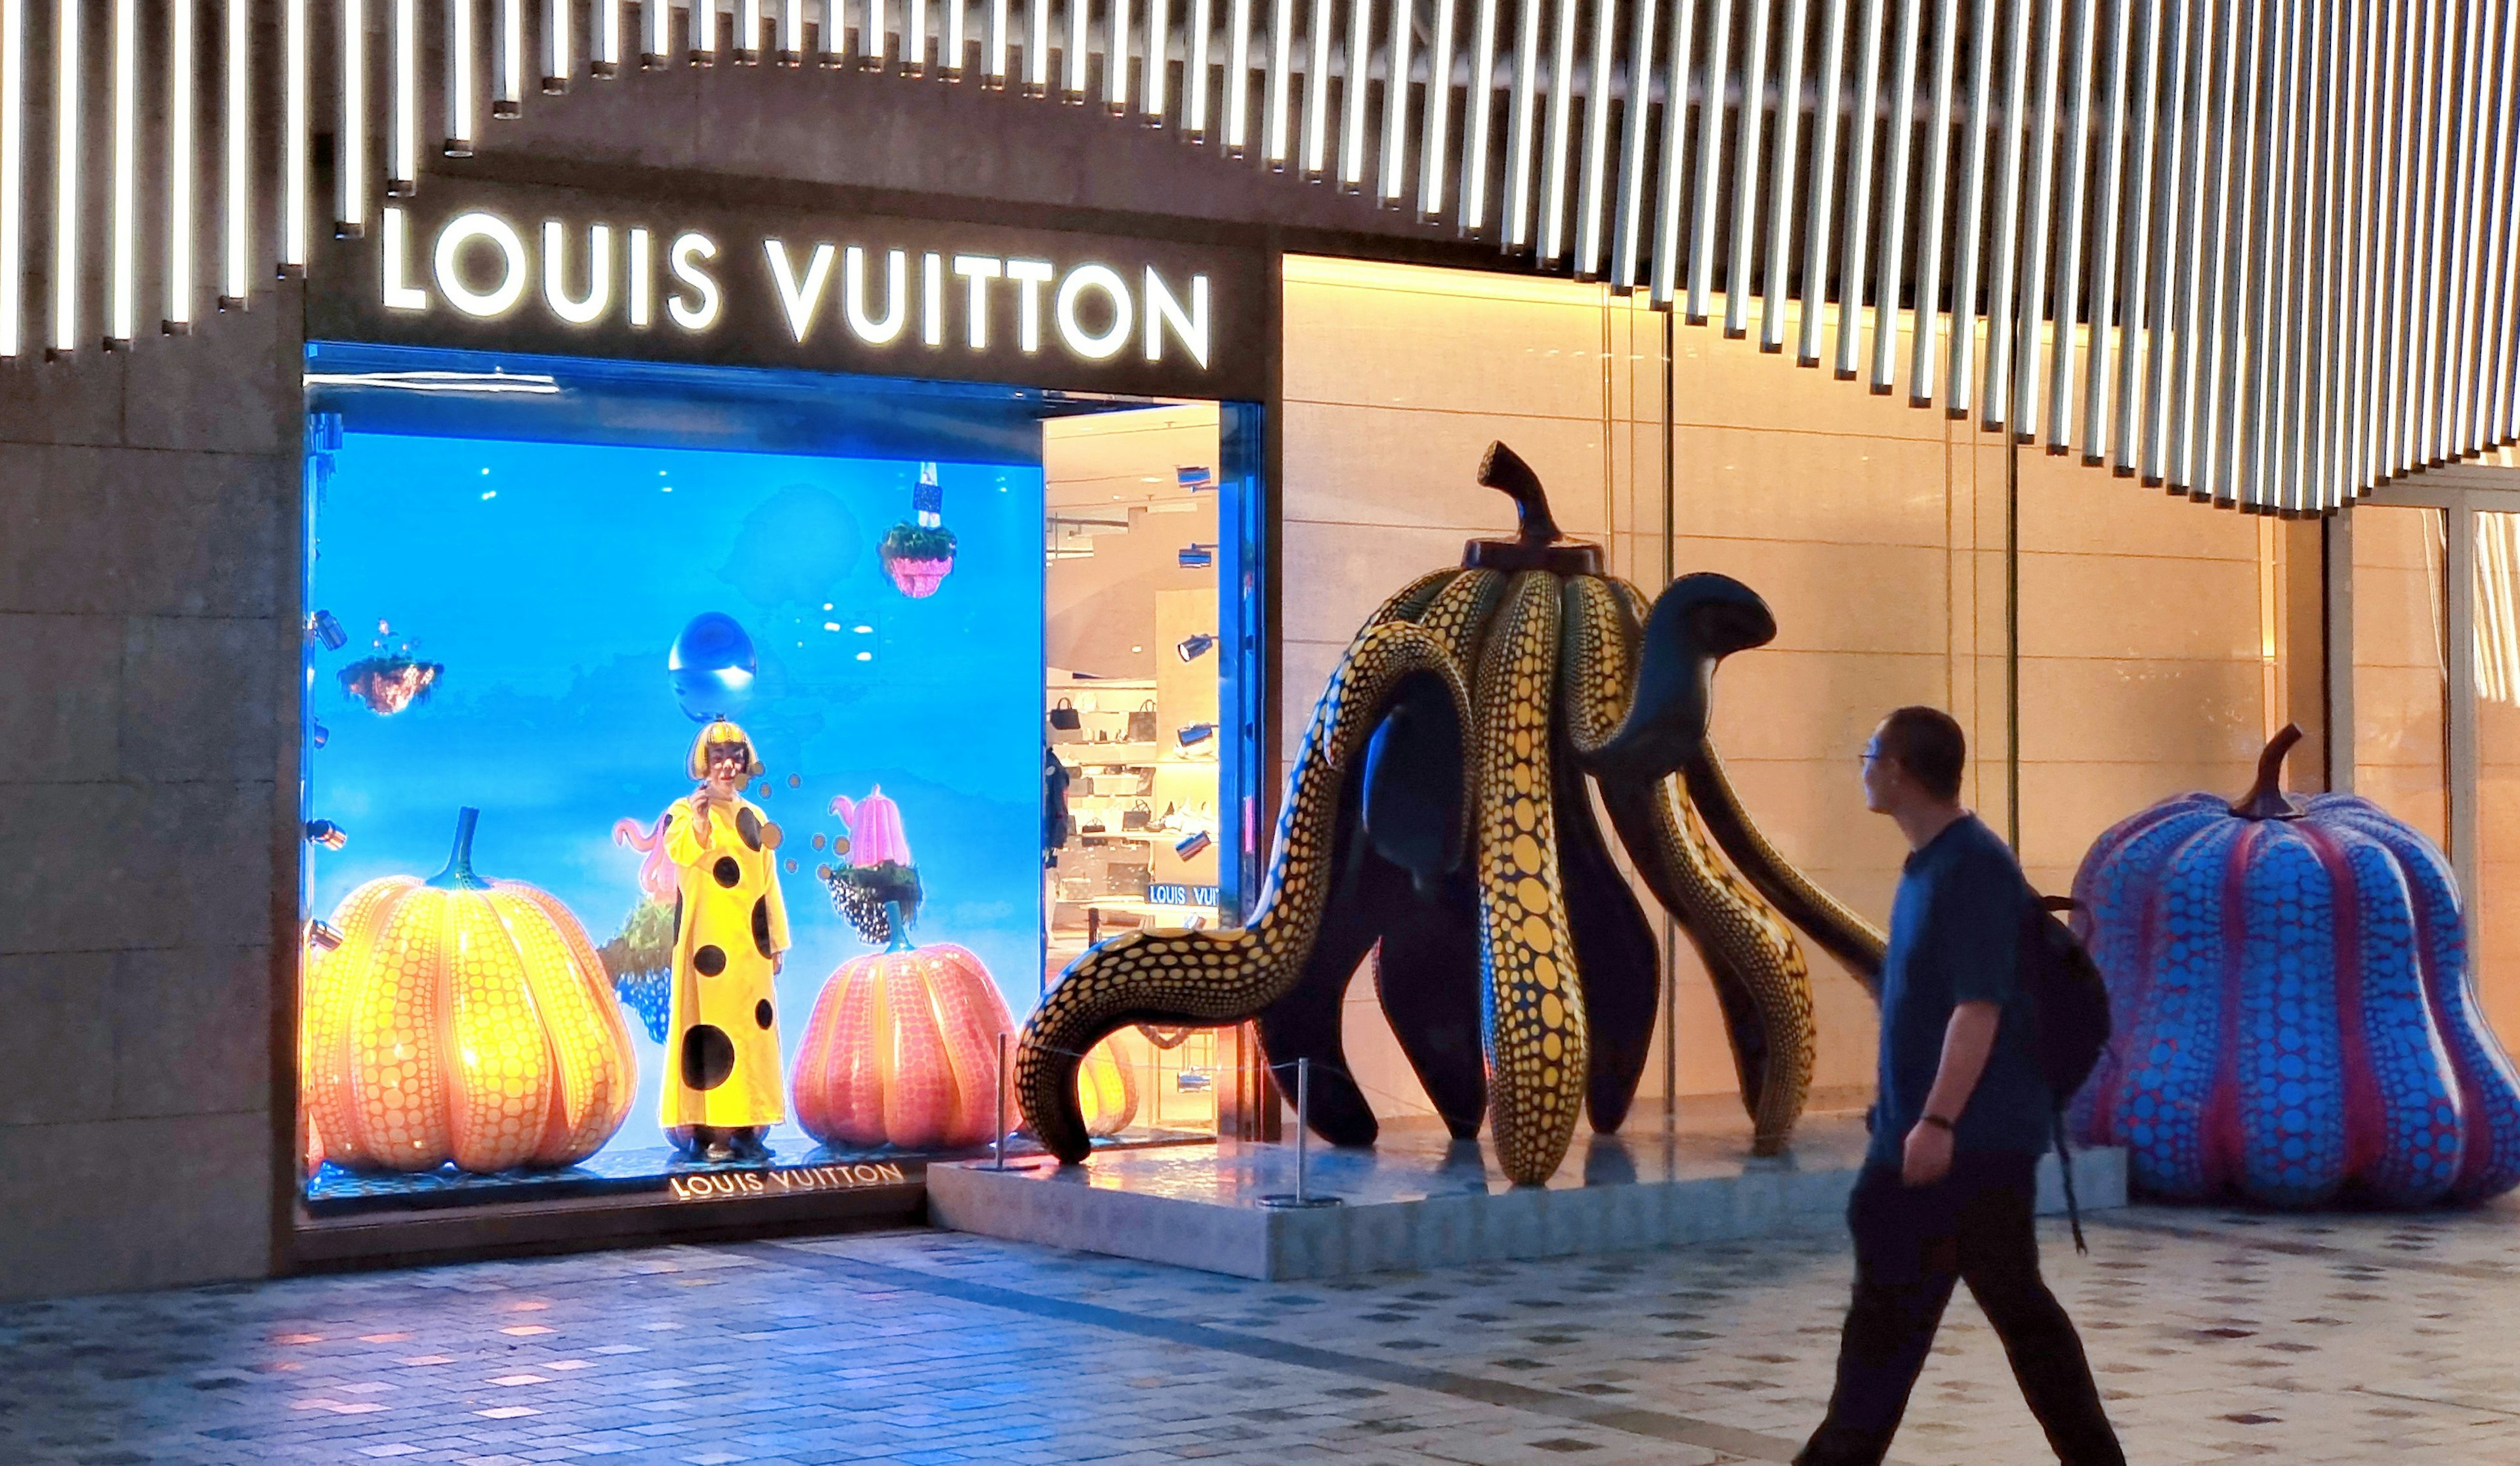 Louis Vuitton's store in Japan. Photo: Getty Images